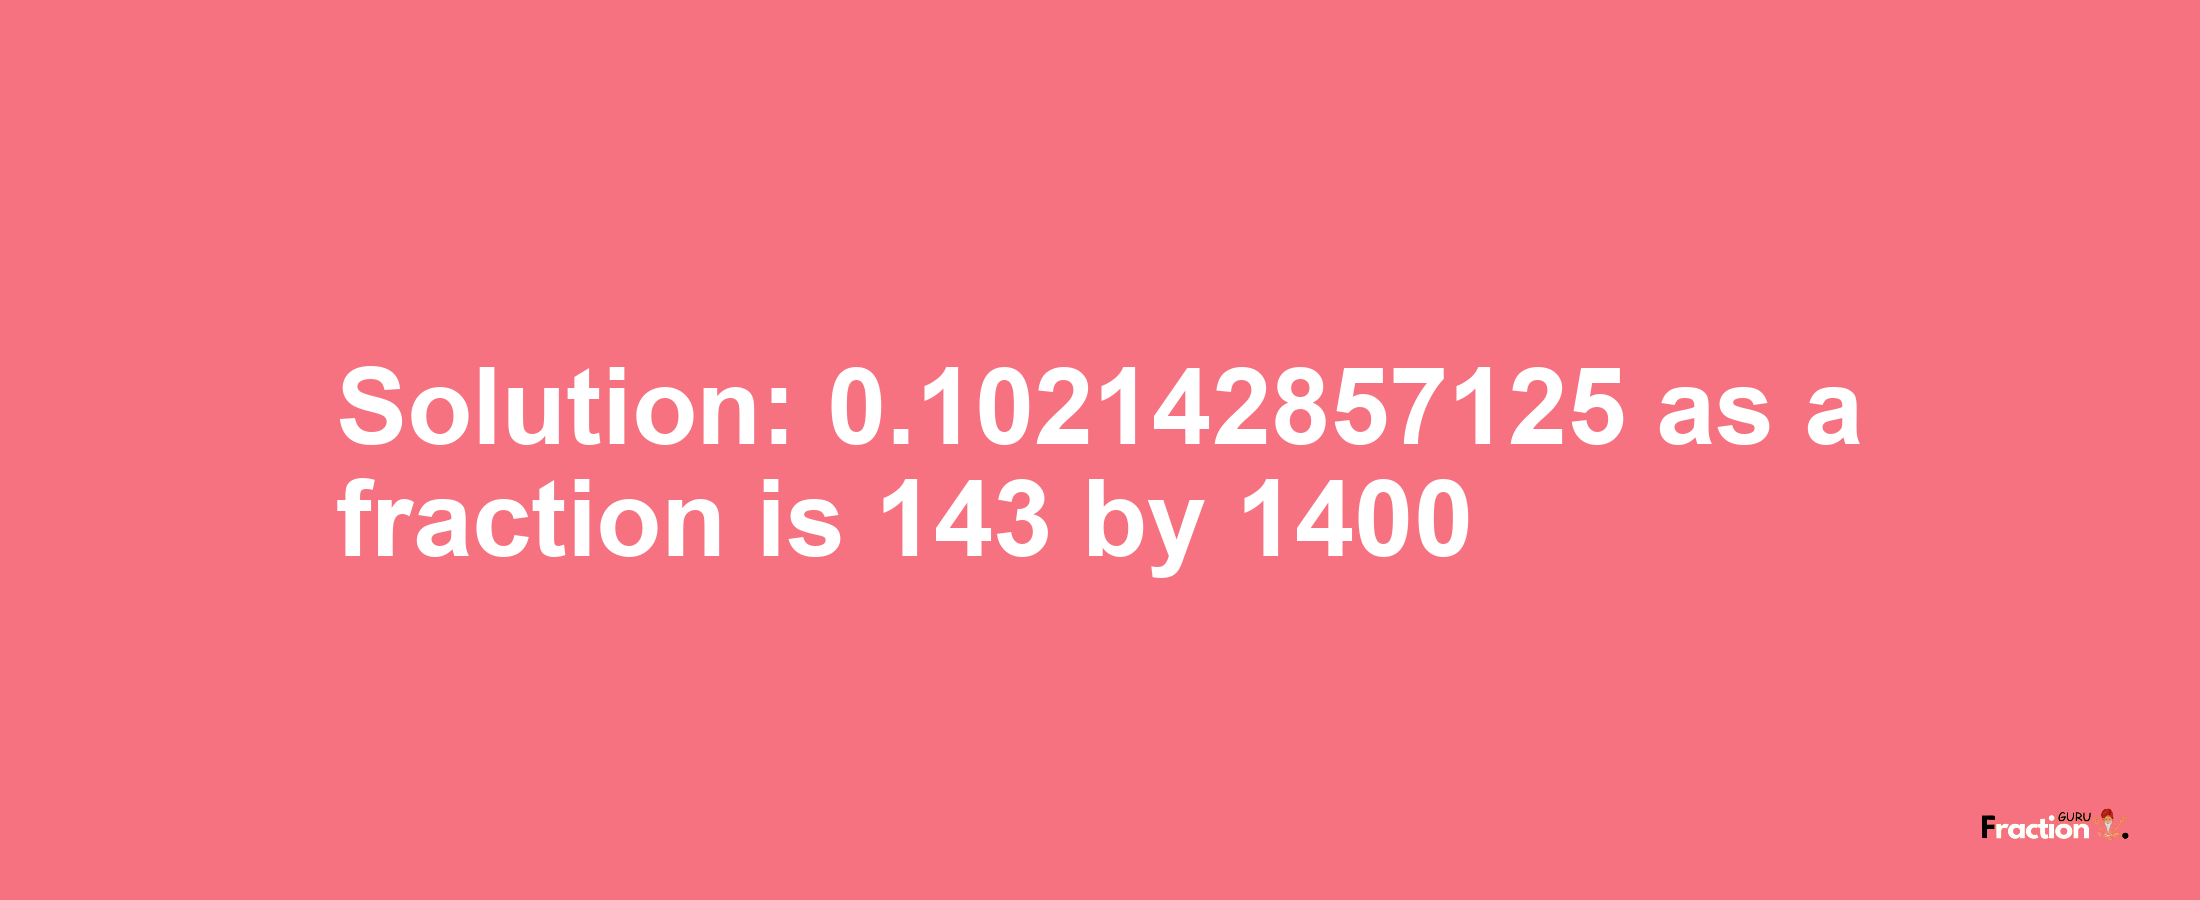 Solution:0.102142857125 as a fraction is 143/1400